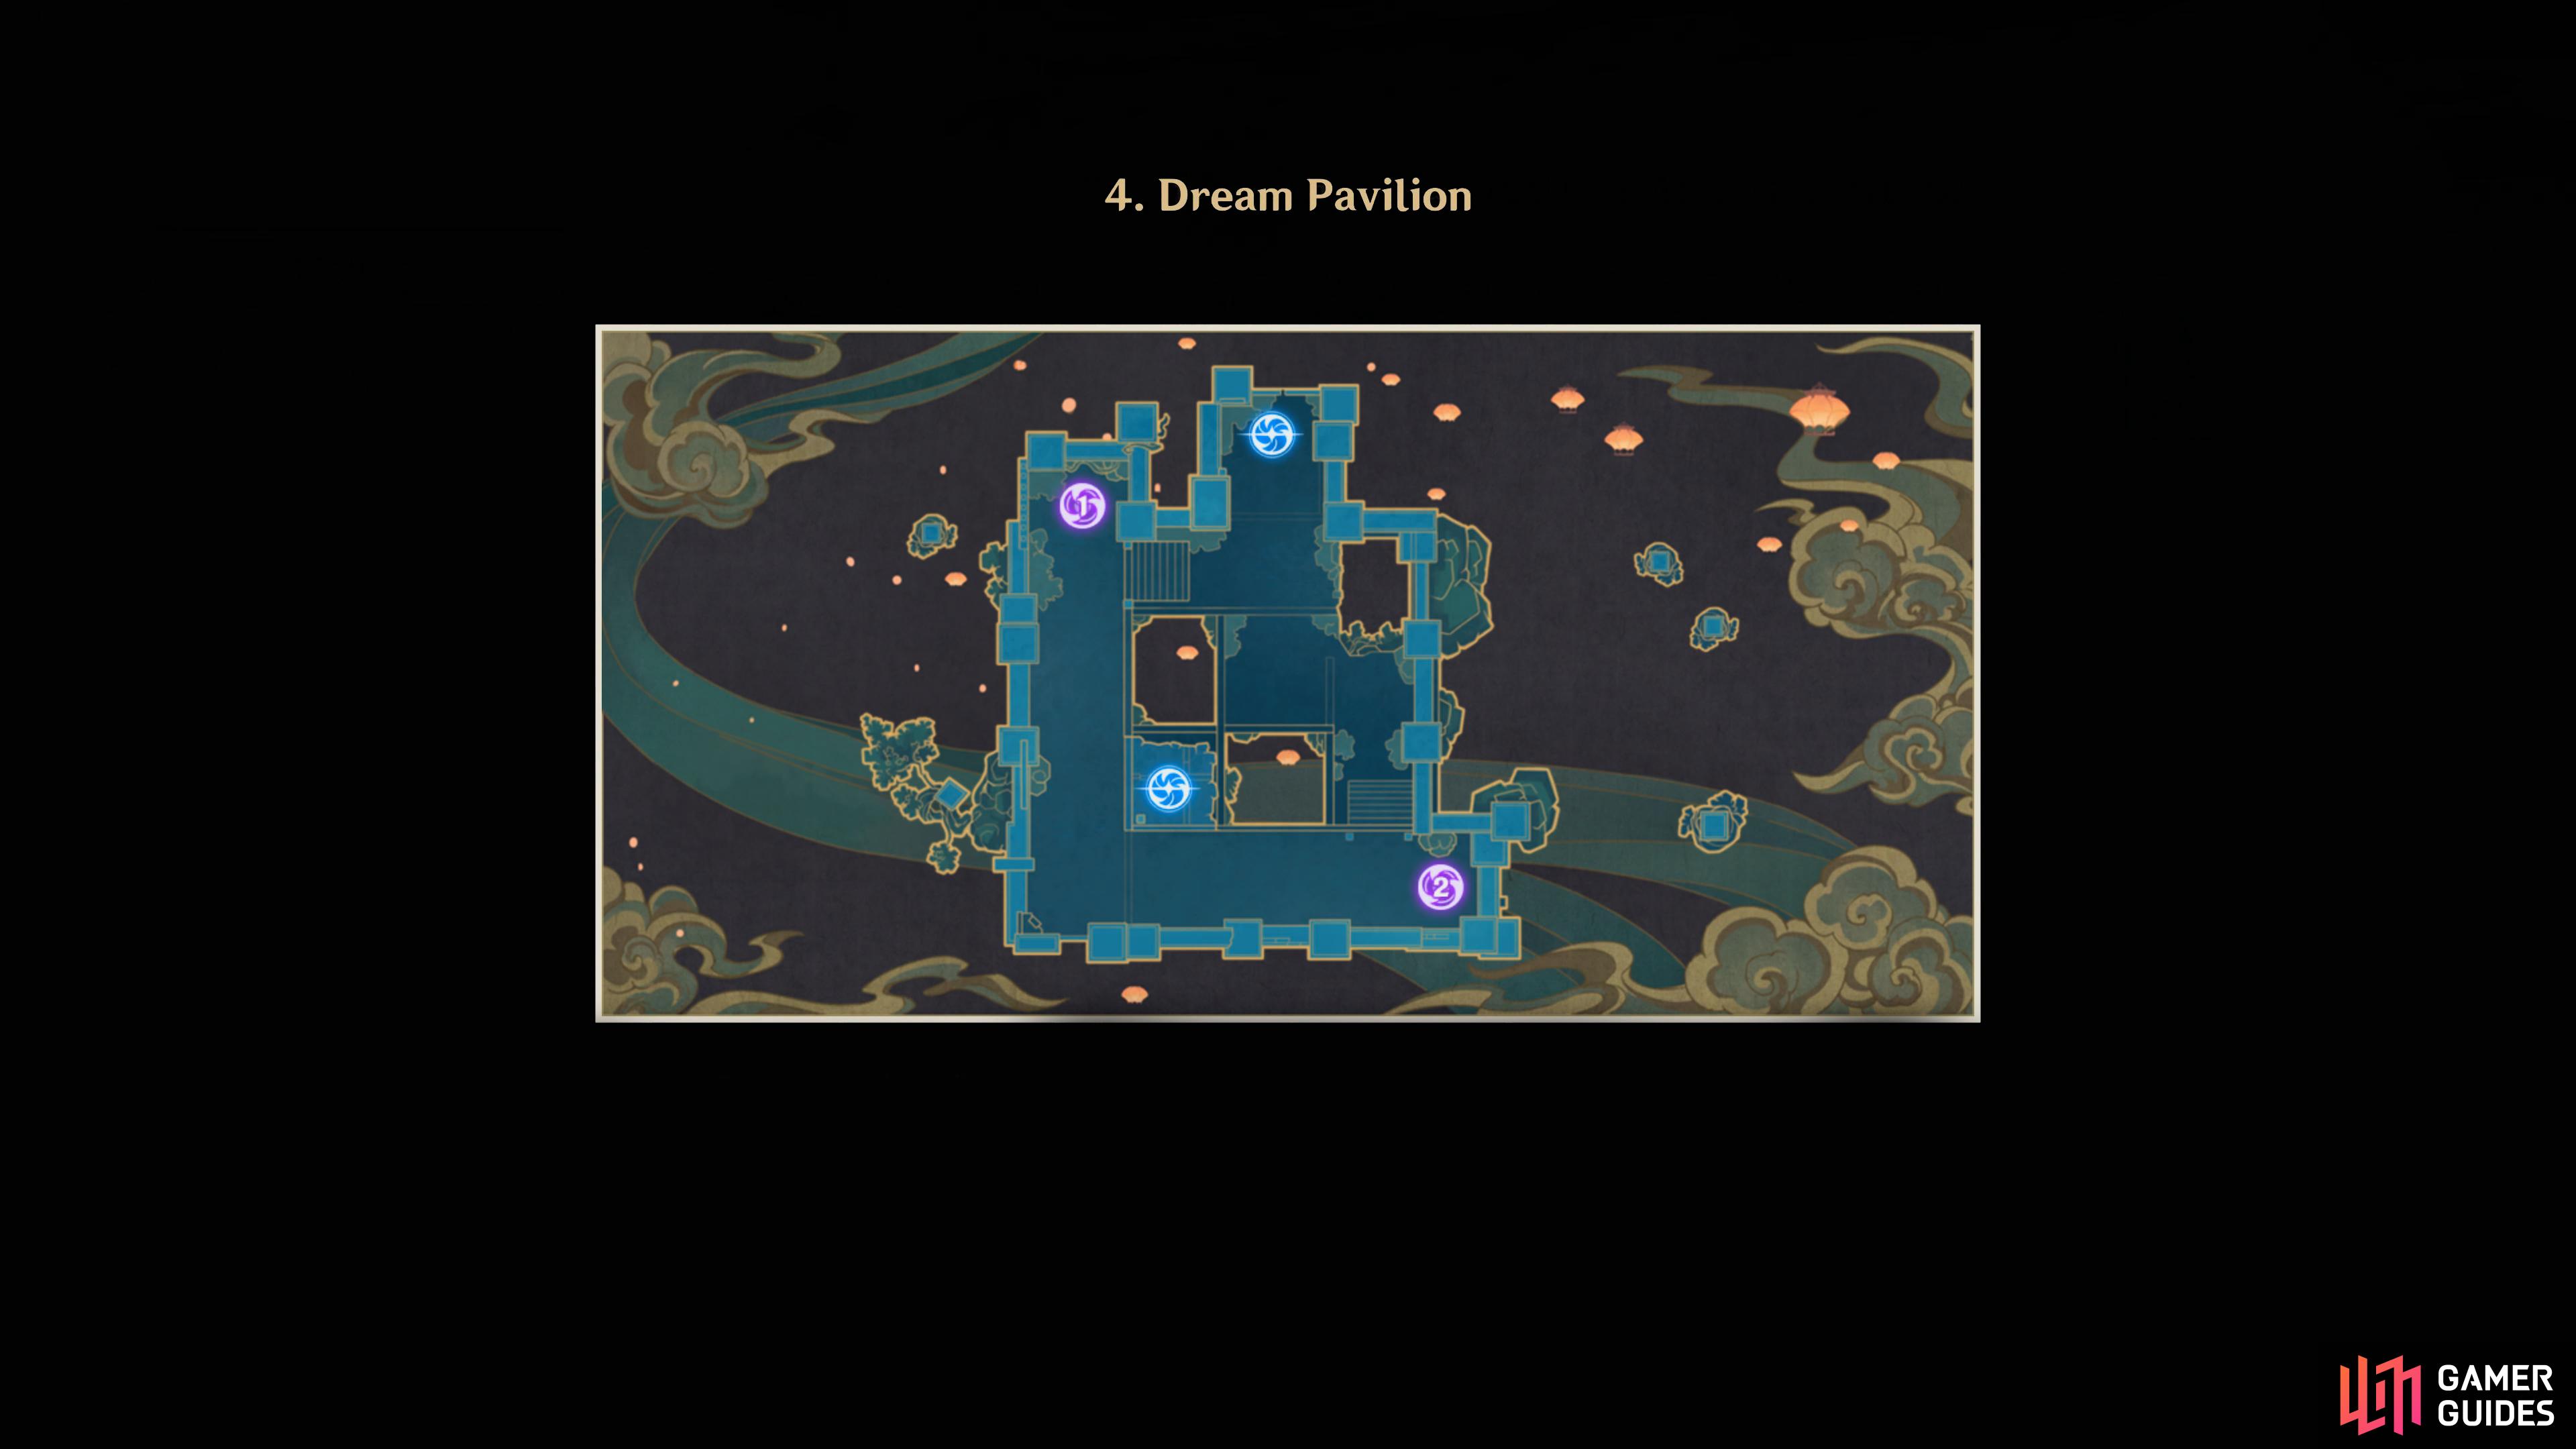 An image of the Dream Pavilion map.